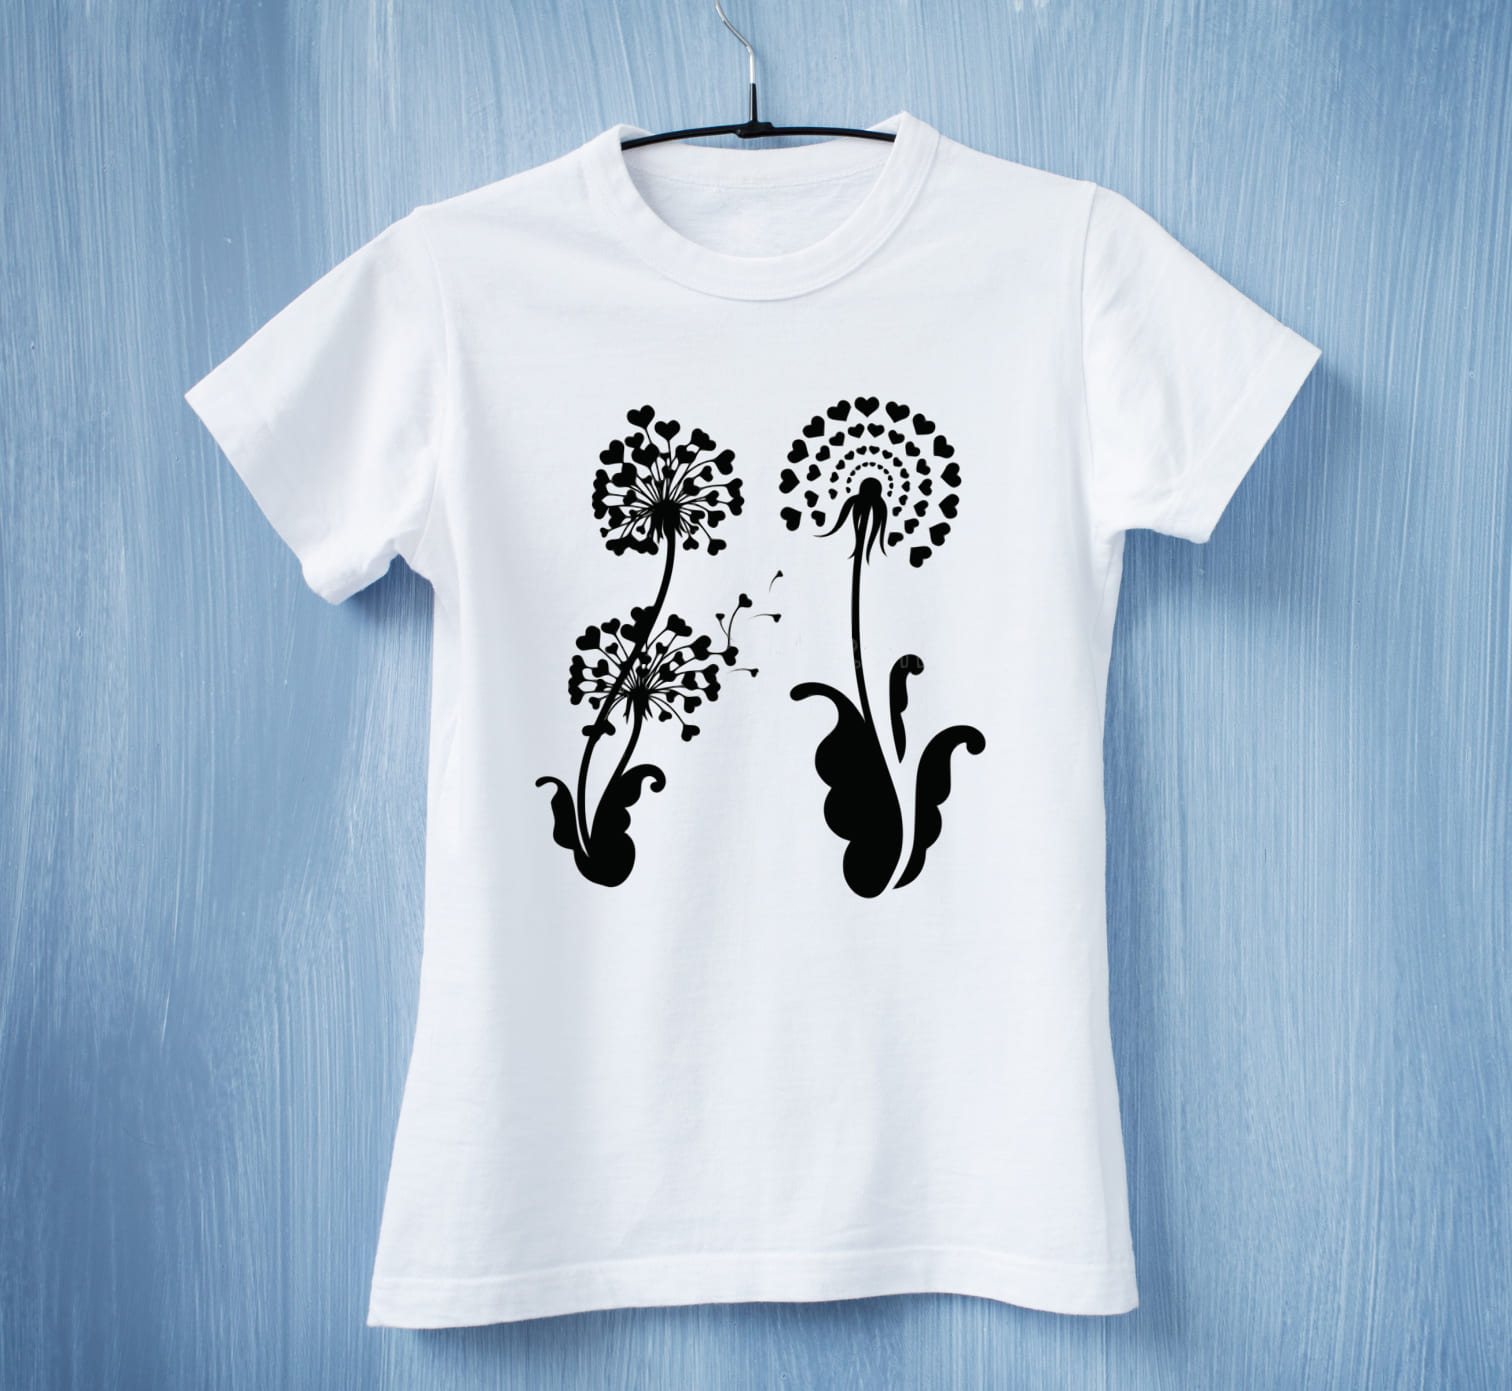 A white t-shirt with 2 black dandelion flowers with black hearts on a blue background.